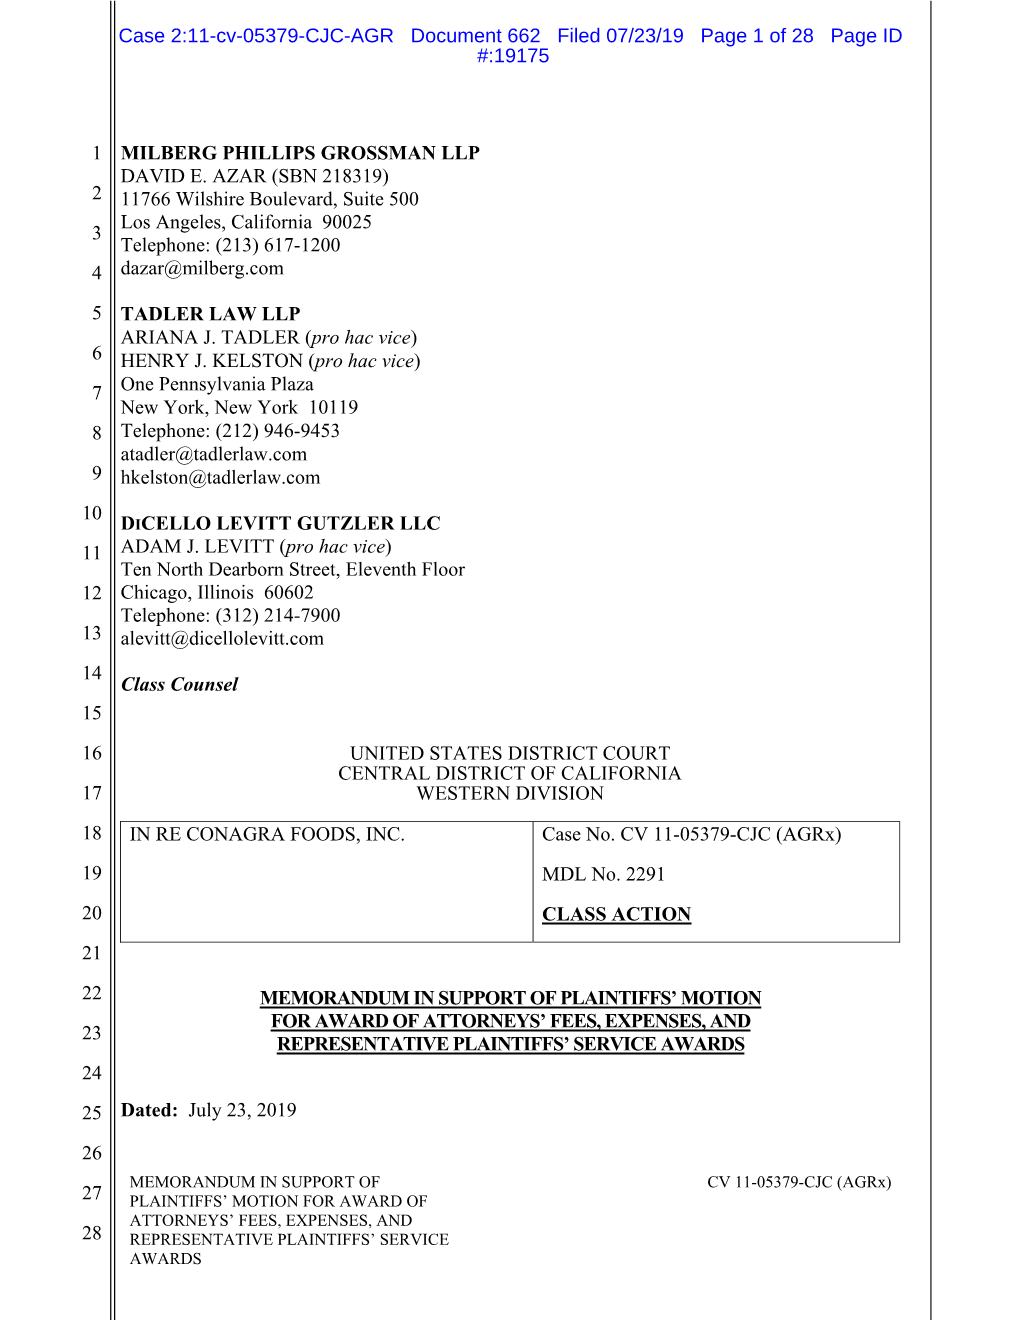 Case 2:11-Cv-05379-CJC-AGR Document 662 Filed 07/23/19 Page 1 of 28 Page ID #:19175